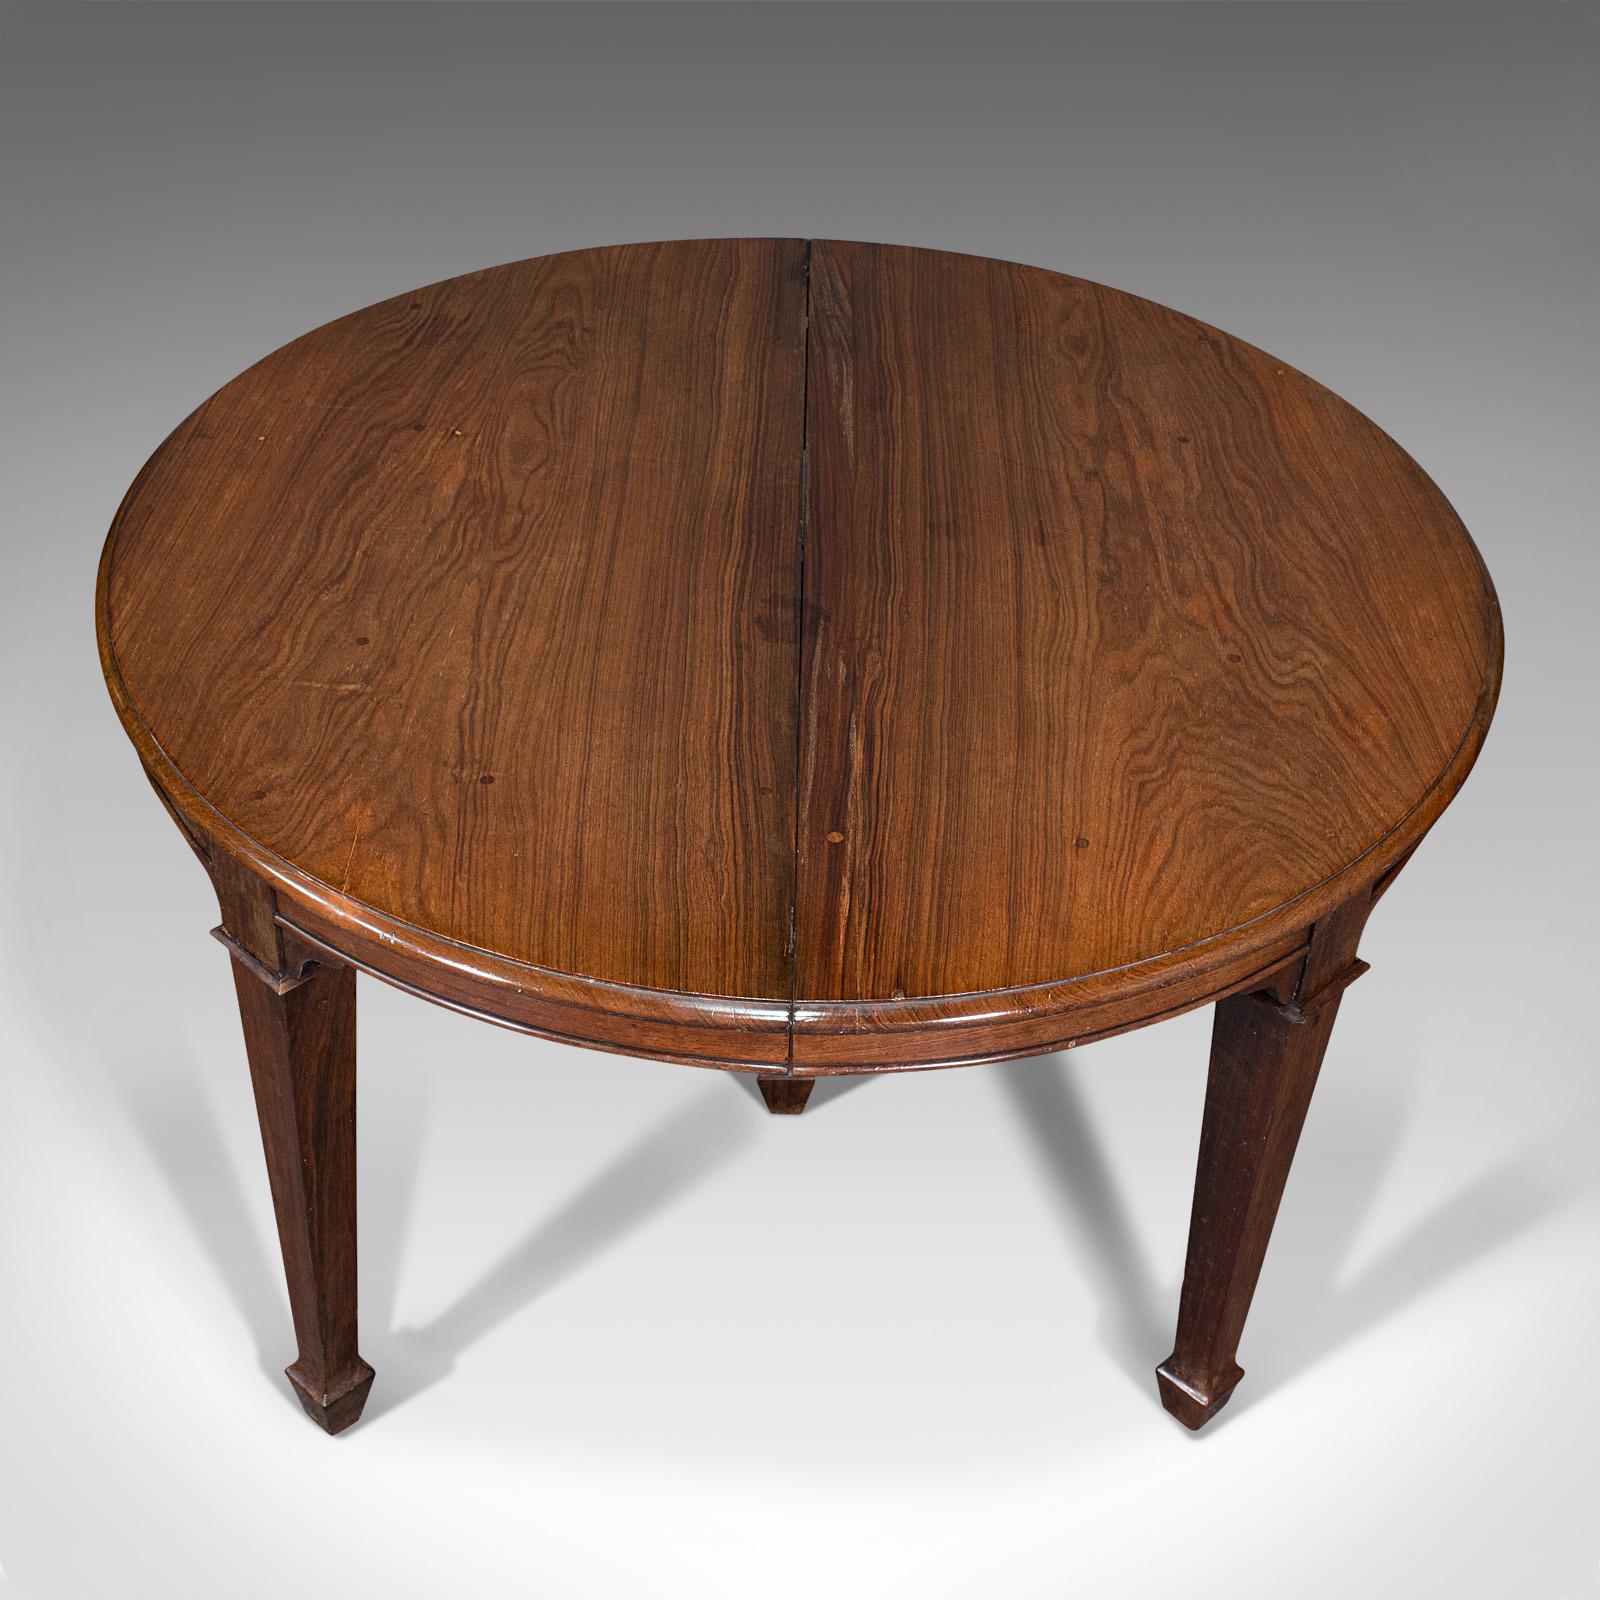 19th Century Antique Colonial Campaign Table, Indian, Rosewood, Dining, Extending, Victorian